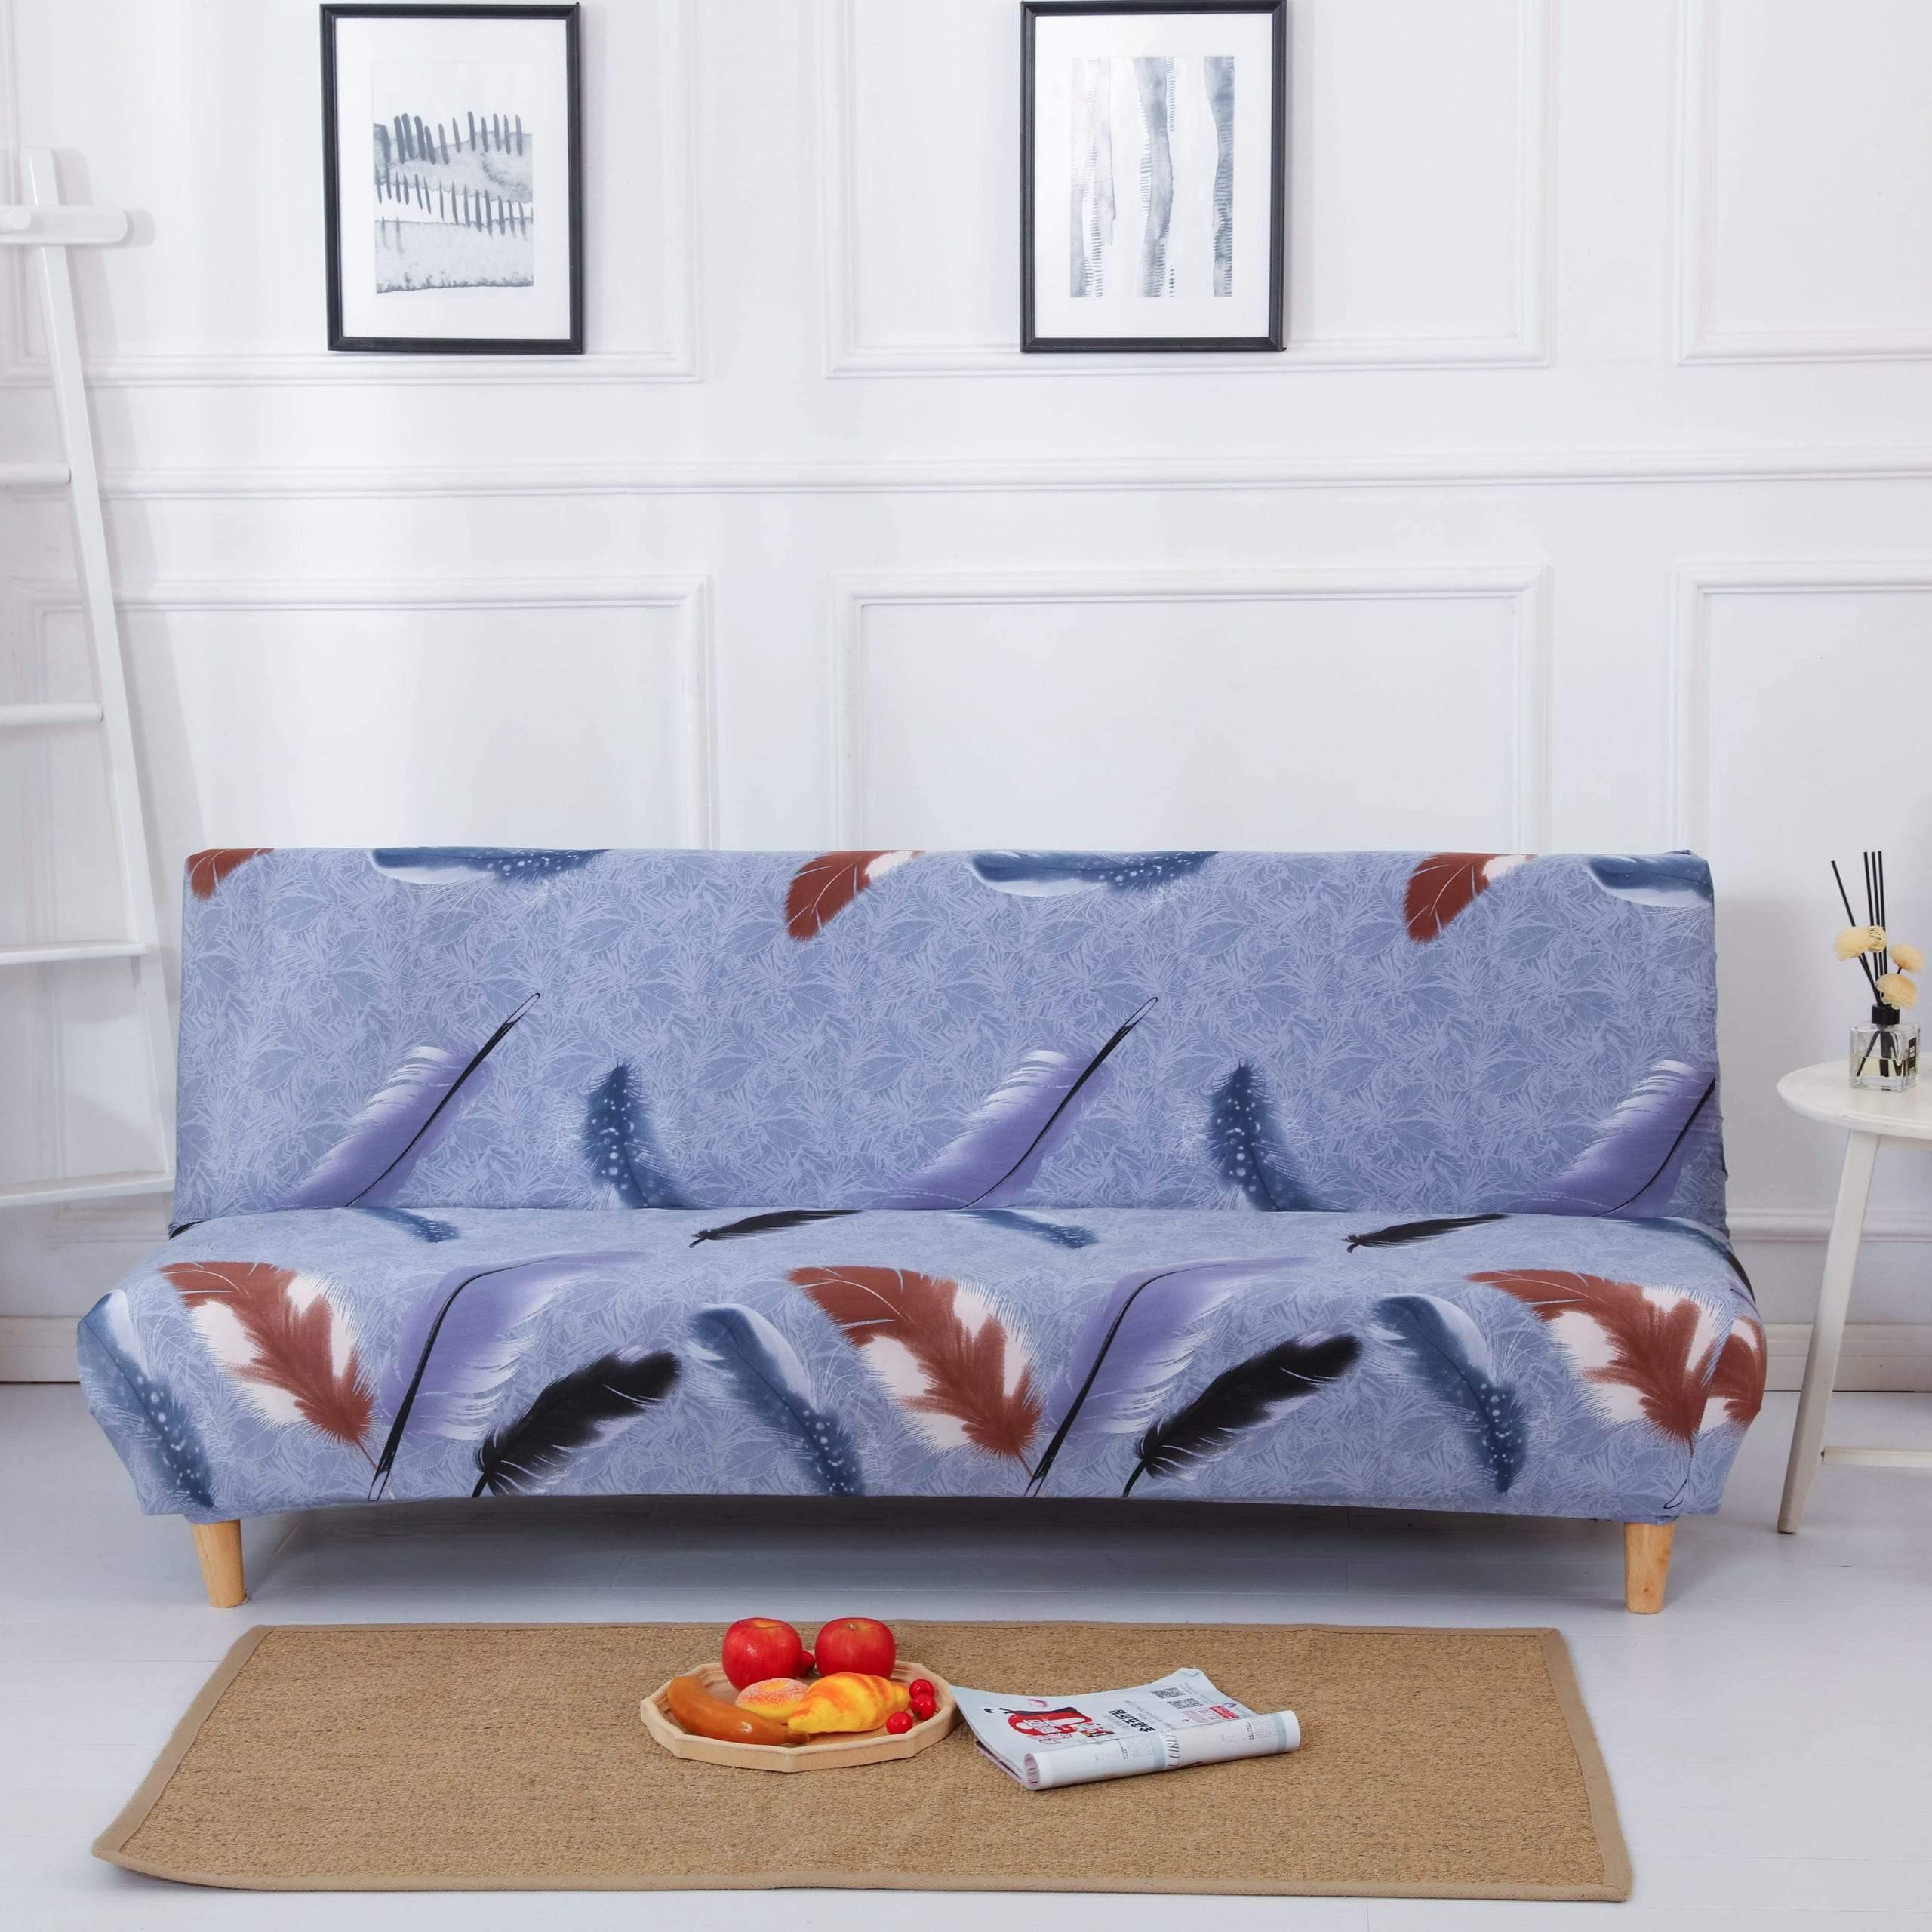 Sofa Bed Cover - Comodino - Adaptable & Expandable - The Sofa Cover Crafter